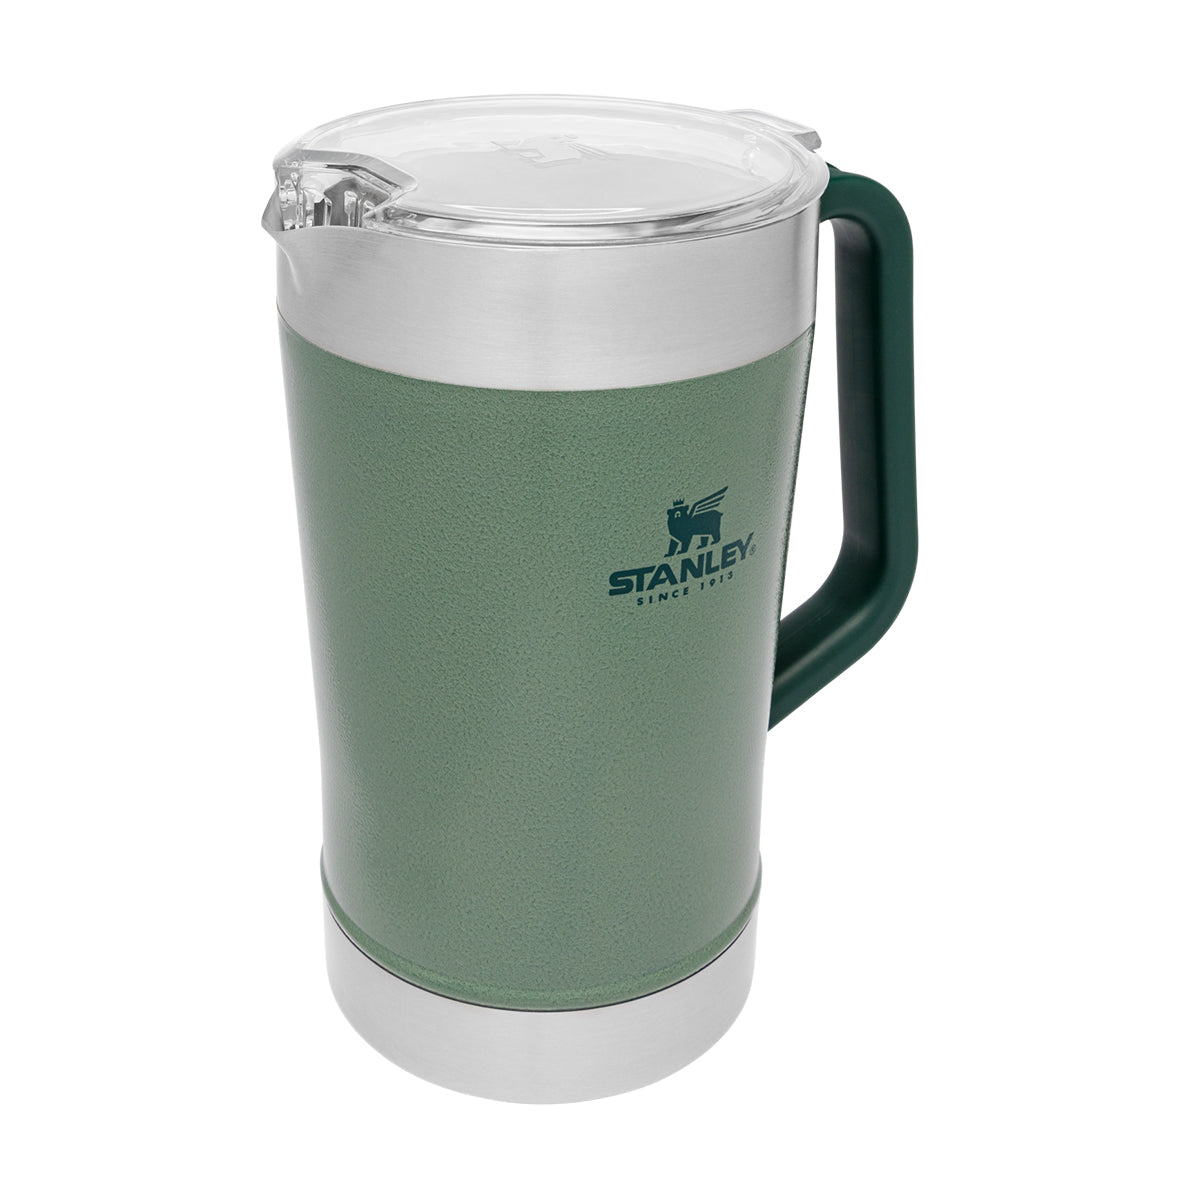 Foam-Lined Stainless Server, Insulated Pitcher, 1.5 Liter, Polished  Stainless